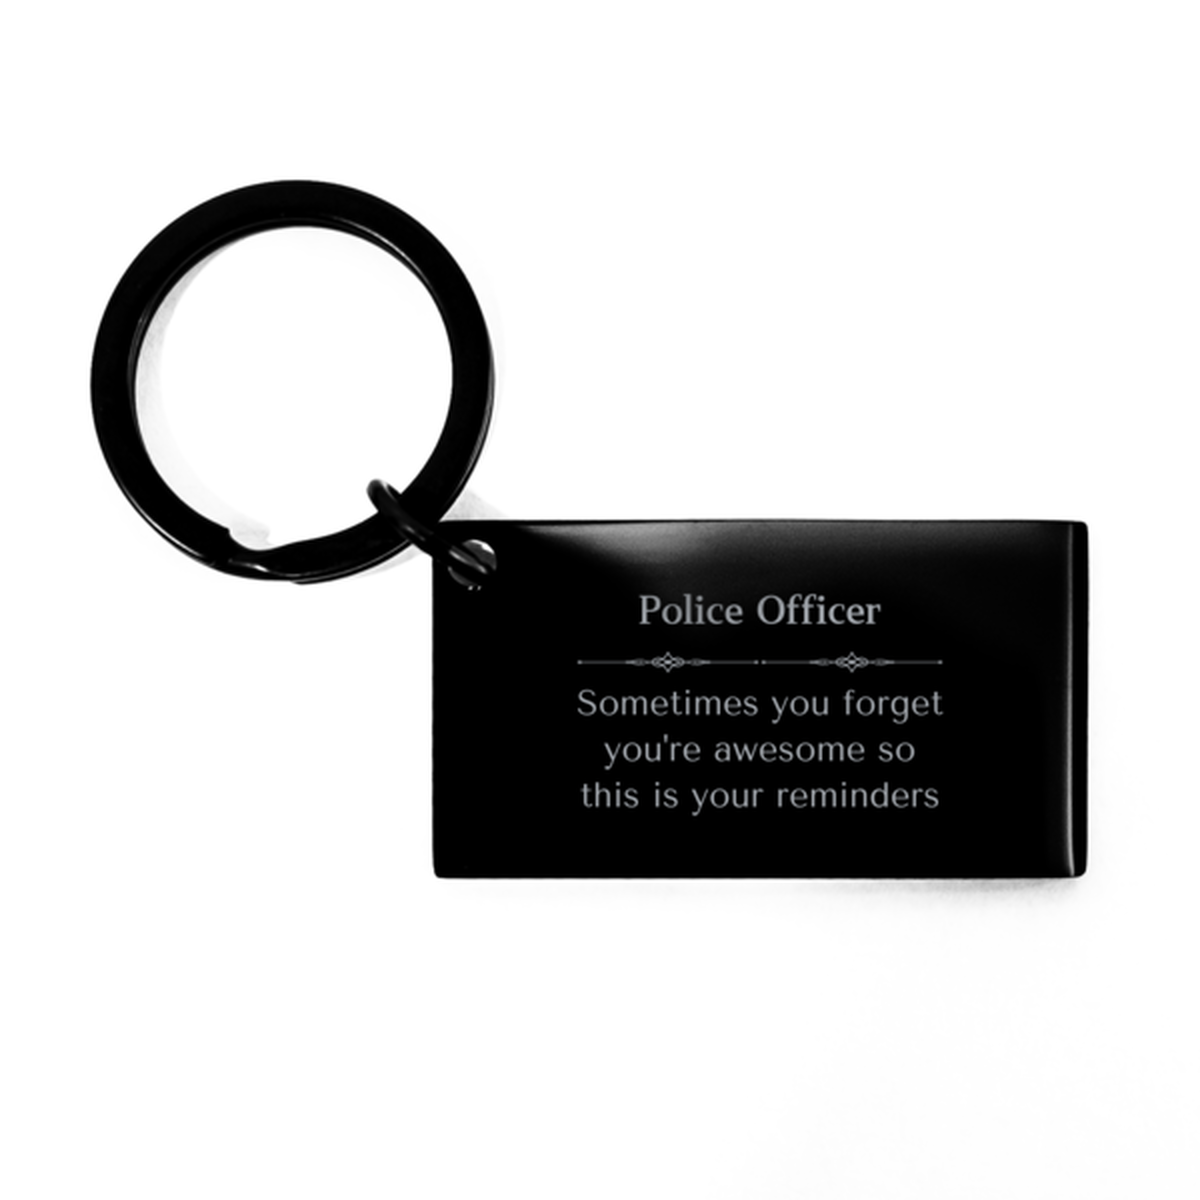 Sentimental Police Officer Keychain, Secretary Sometimes you forget you're awesome so this is your reminders, Graduation Christmas Birthday Gifts for Police Officer, Men, Women, Coworkers